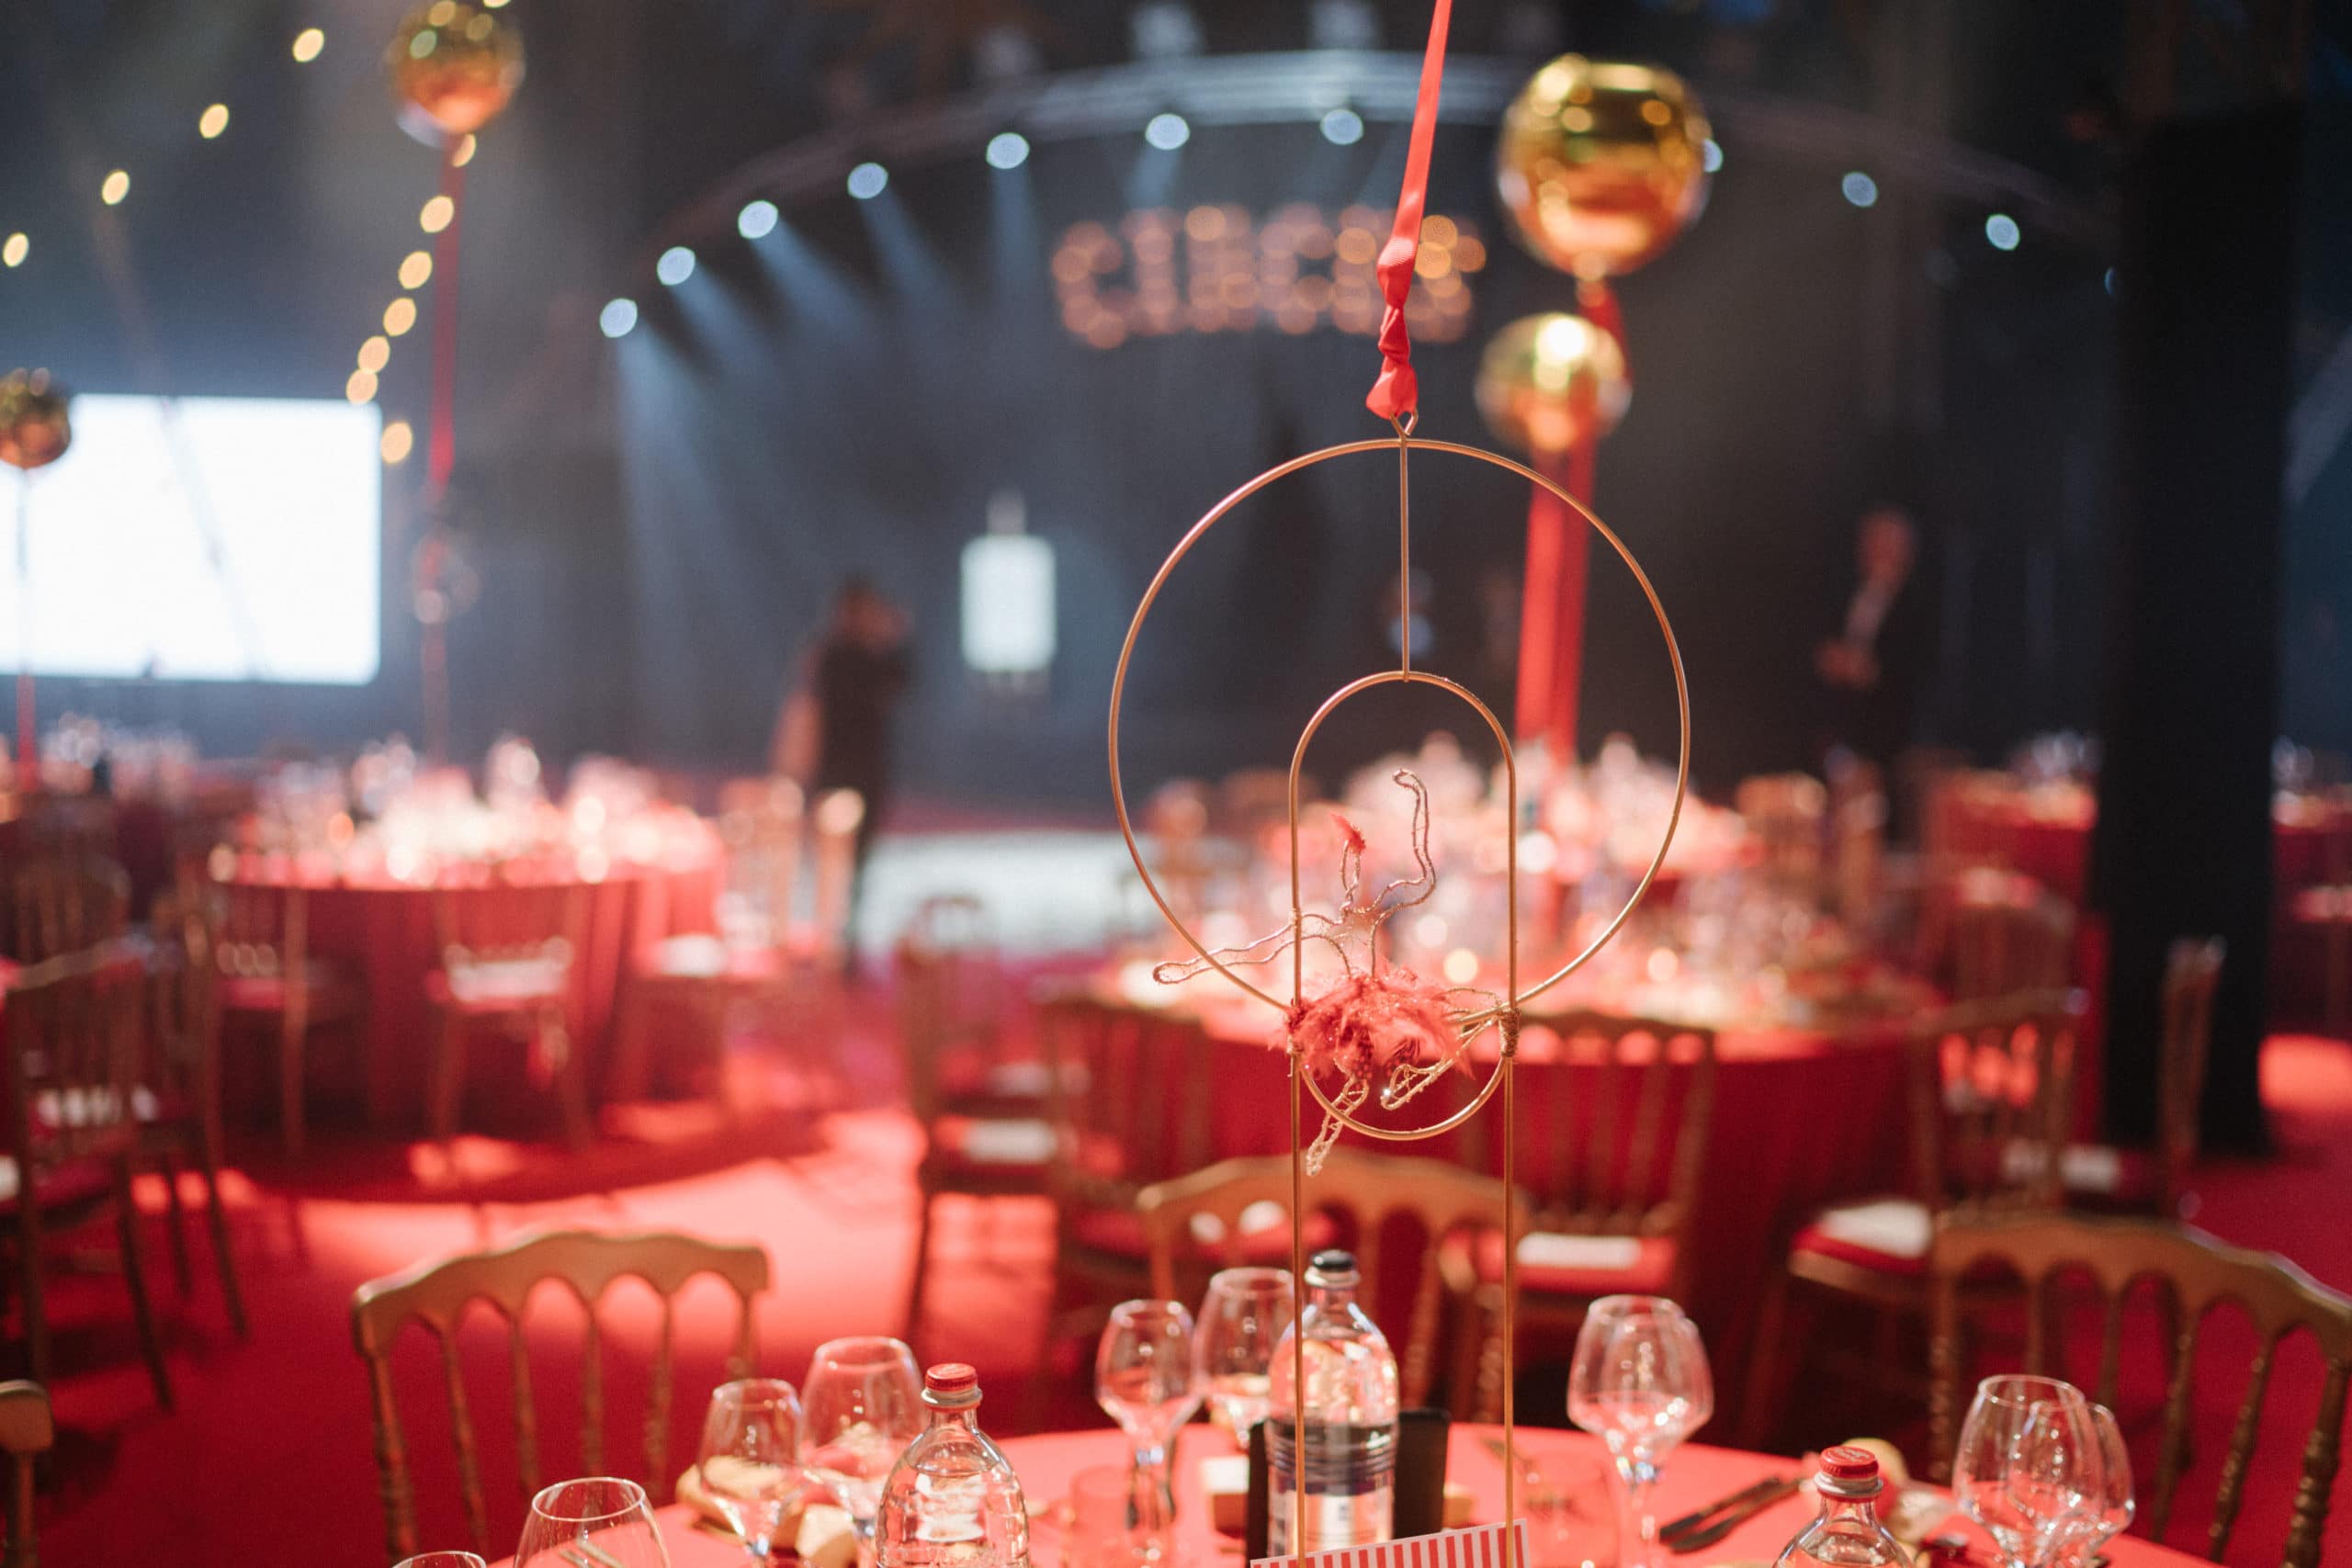 Shine a light event agency Luxembourg - Creates immersives experiences - The circus Red Cross Ball